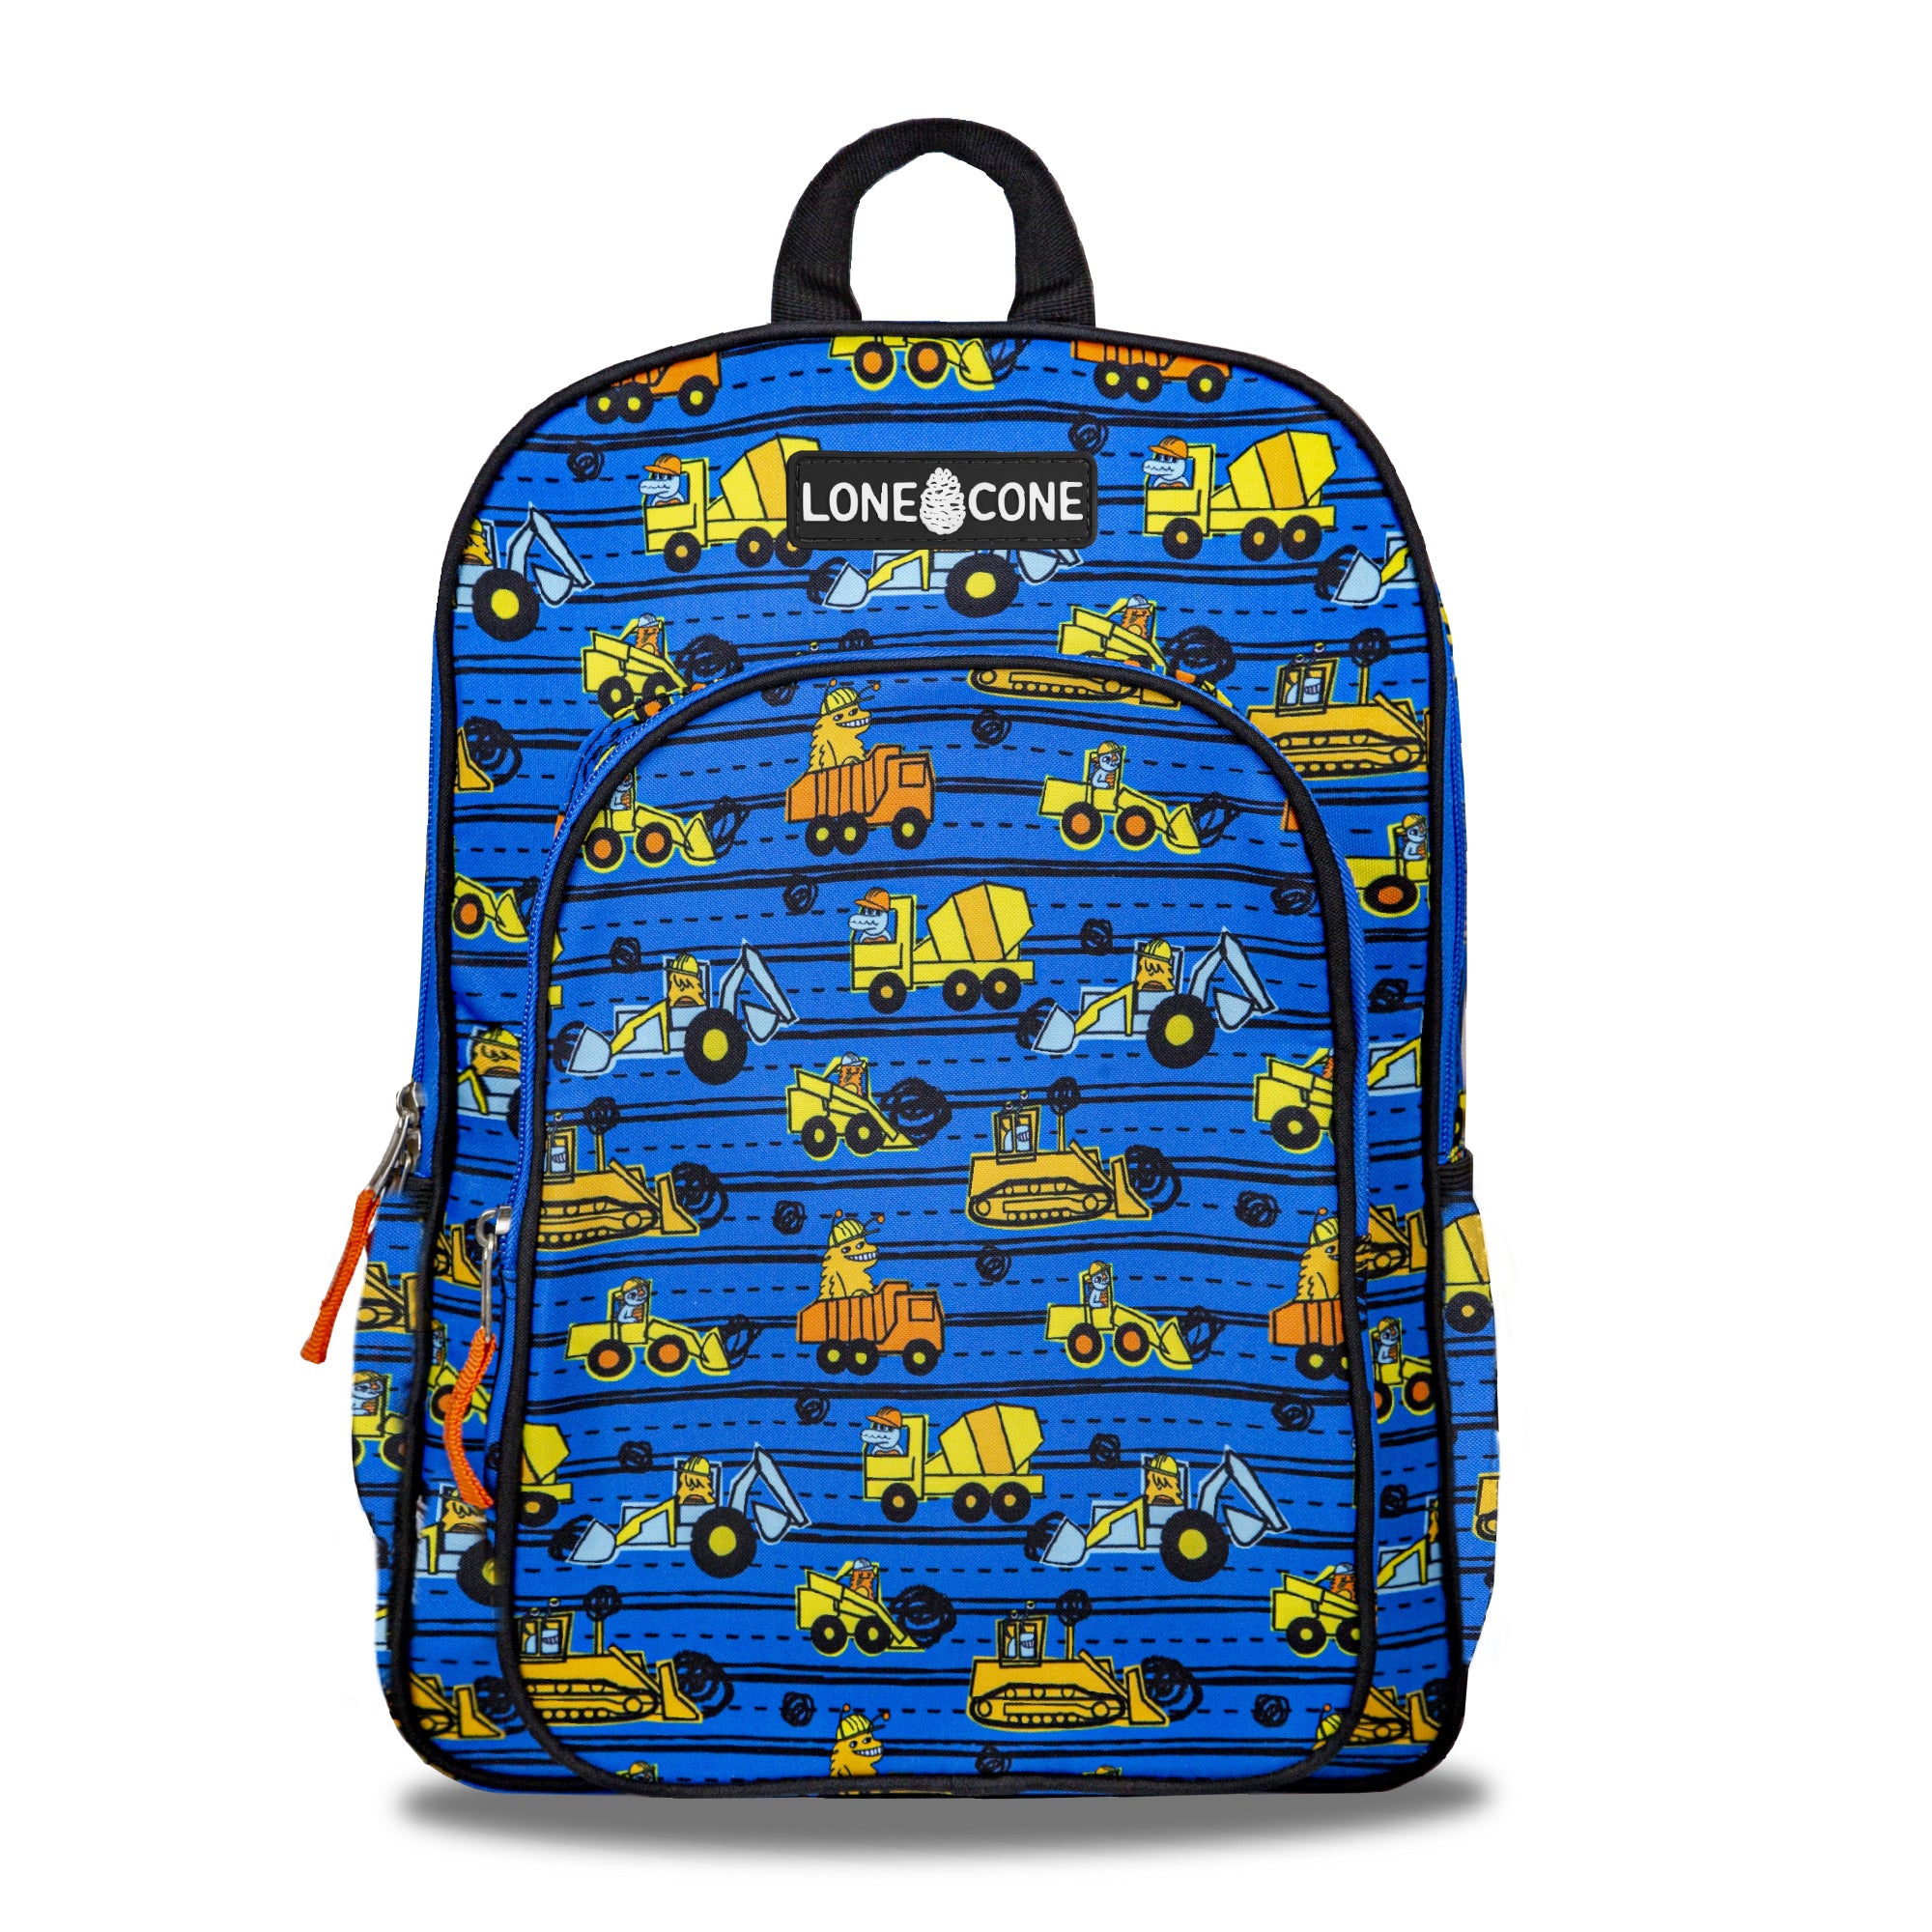 LONECONE Construction Monsters 15" Backpack